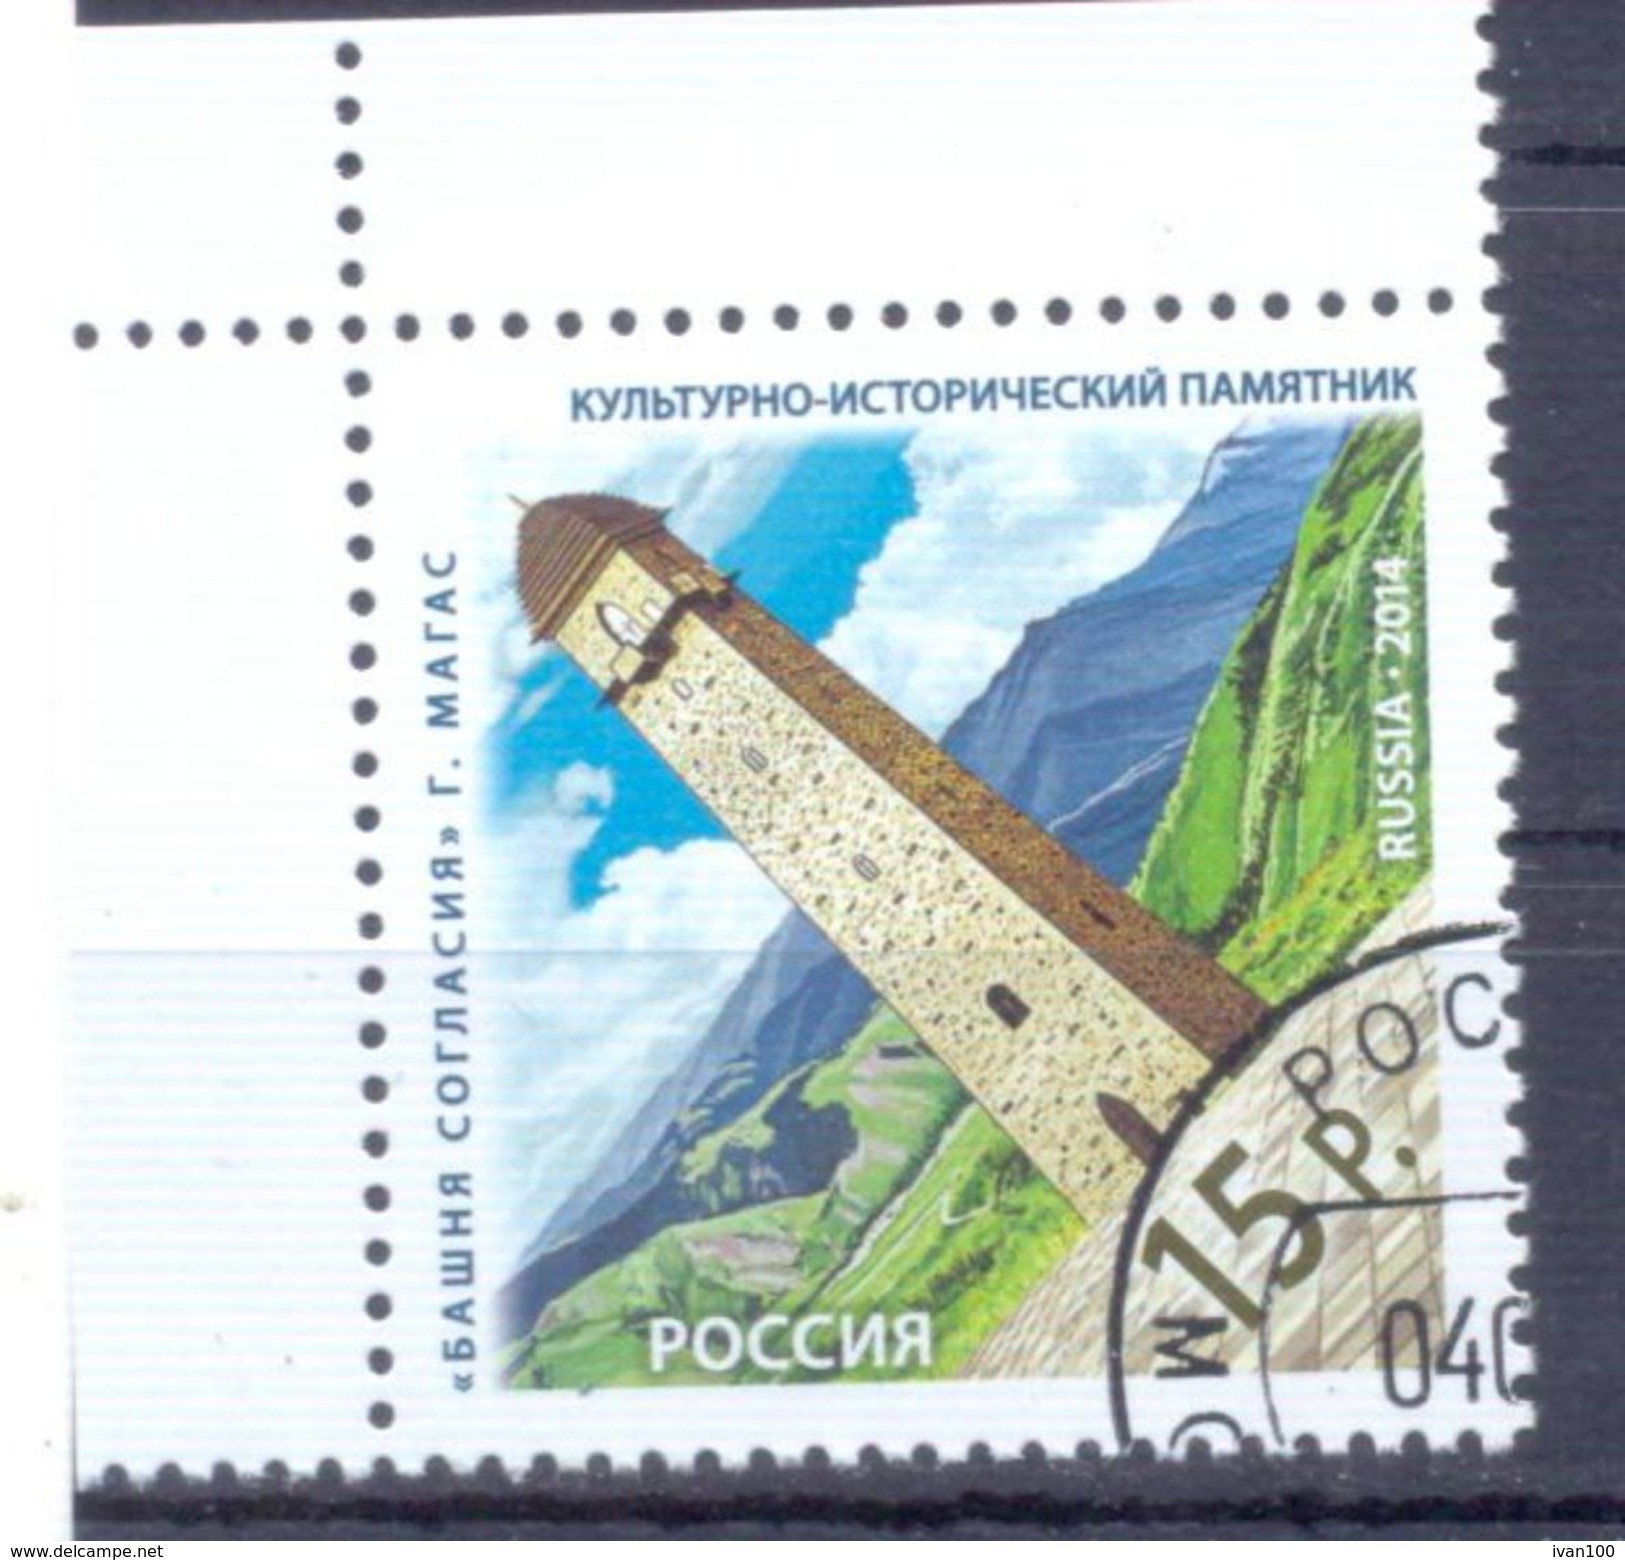 2014. Russia, The Consent Tower, Ingushetia, 1v, Used/CTO - Used Stamps